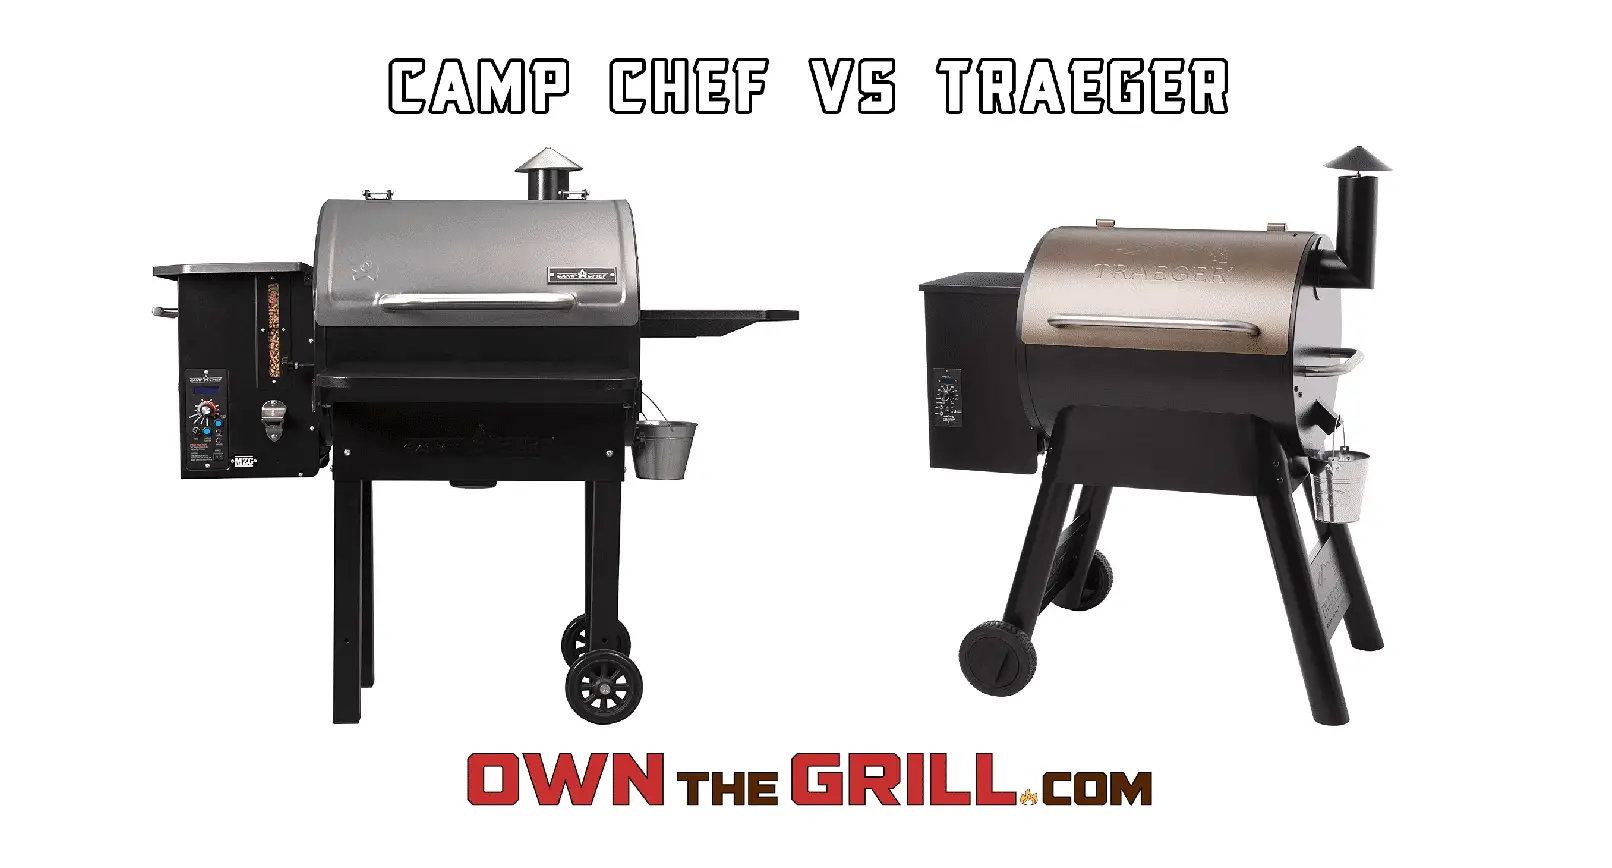 Camp Chef Vs Traeger Pellet Grills Comparison Own The Grill